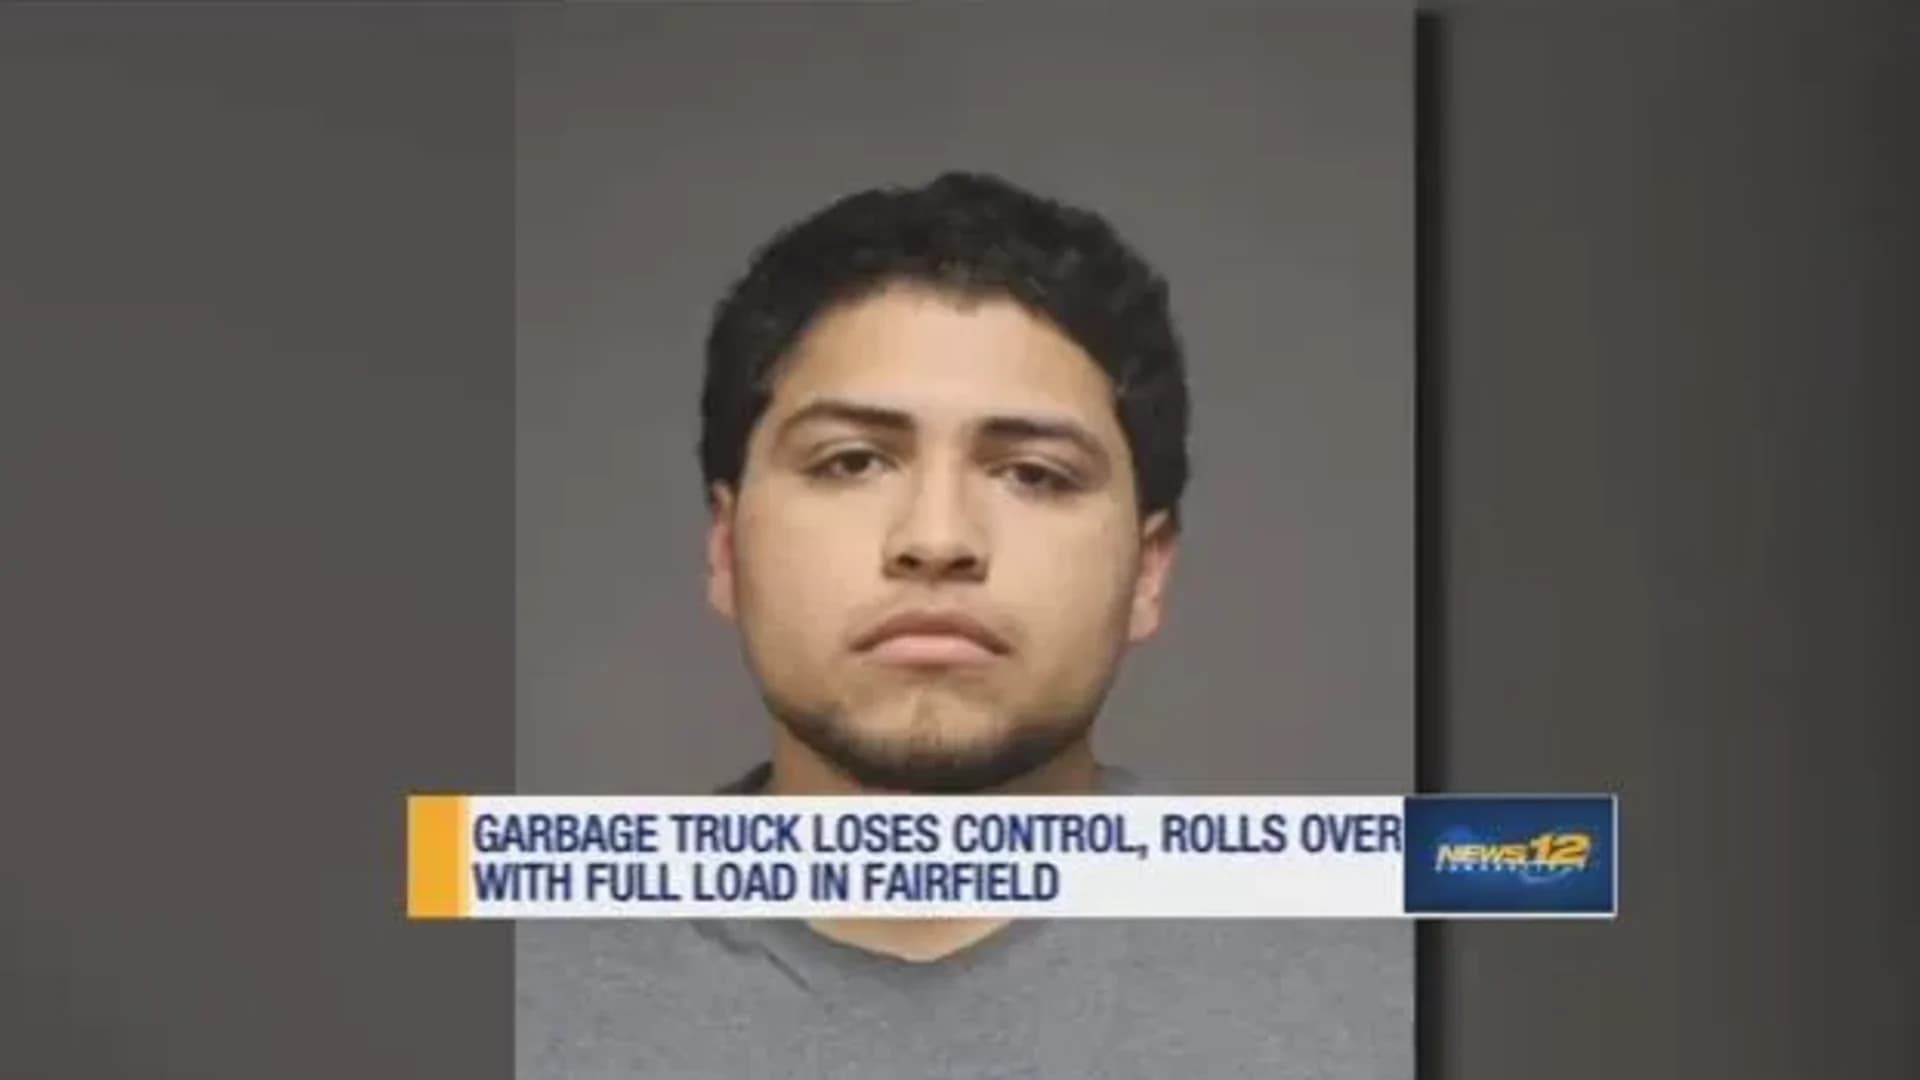 Fairfield police: Teen smoked pot right before flipping garbage truck